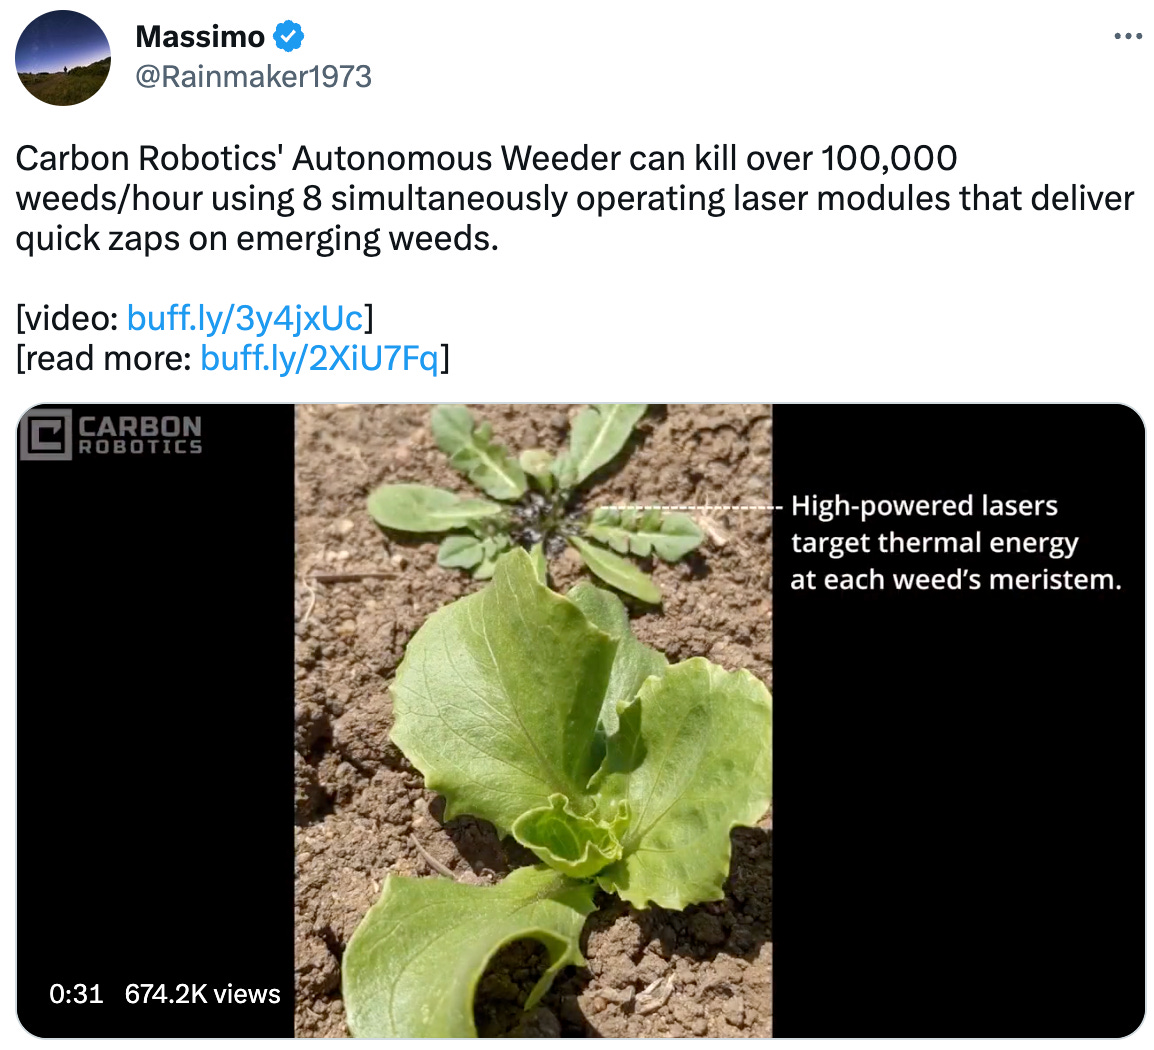  See new Tweets Conversation Massimo @Rainmaker1973 Carbon Robotics' Autonomous Weeder can kill over 100,000 weeds/hour using 8 simultaneously operating laser modules that deliver quick zaps on emerging weeds.    [video: https://buff.ly/3y4jxUc]  [read more: https://buff.ly/2XiU7Fq]